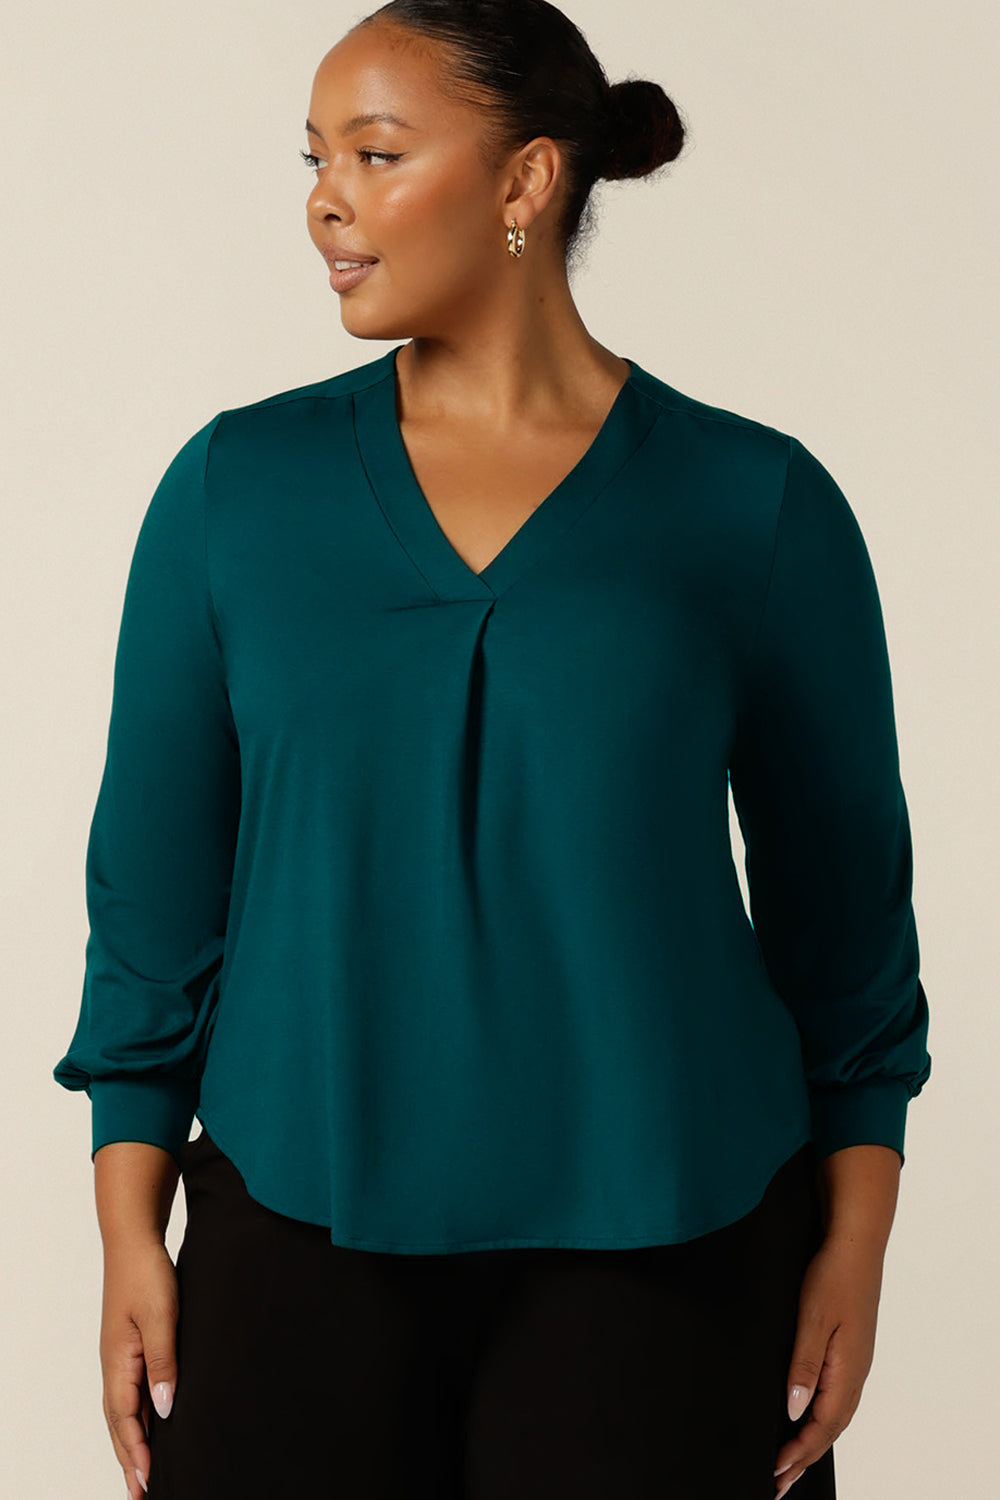 A size 18, plus size woman wears a long sleeve, V-neck top in bamboo jersey., this top is good for work and casual wear.